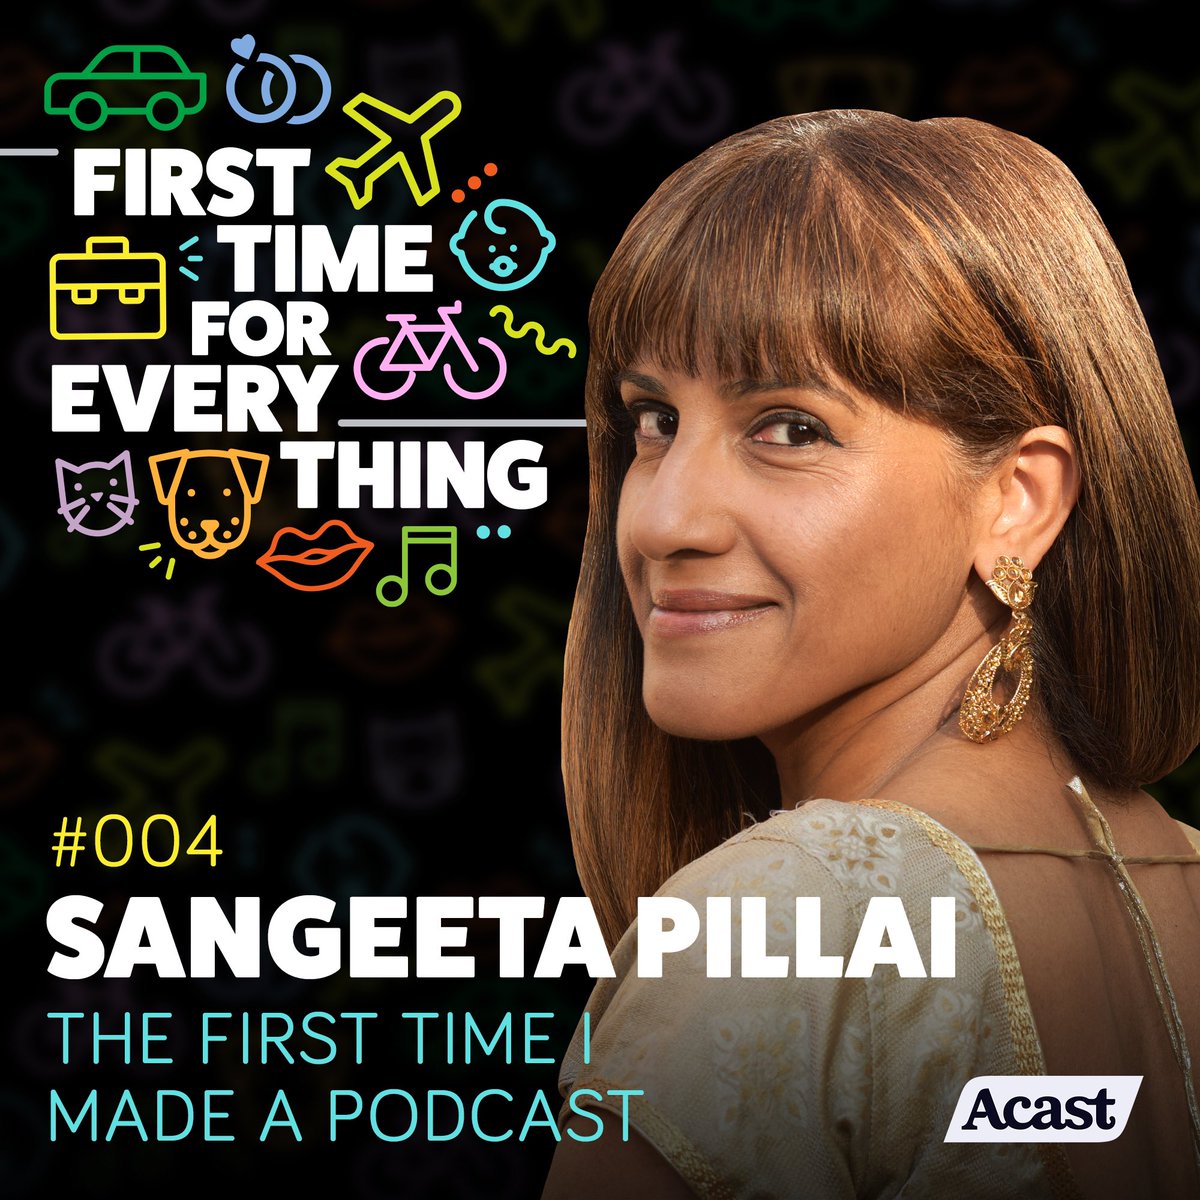 Ep 4 of #FirstTimeForEverything is here, featuring activist, writer and speaker Sangeeta Pillai (@Soul_Sutras)! Join us as we discuss pitching to Spotify as a podcast novice, being a voice for the underrepresented and so much more! podfollow.com/ftfe #masalapodcast